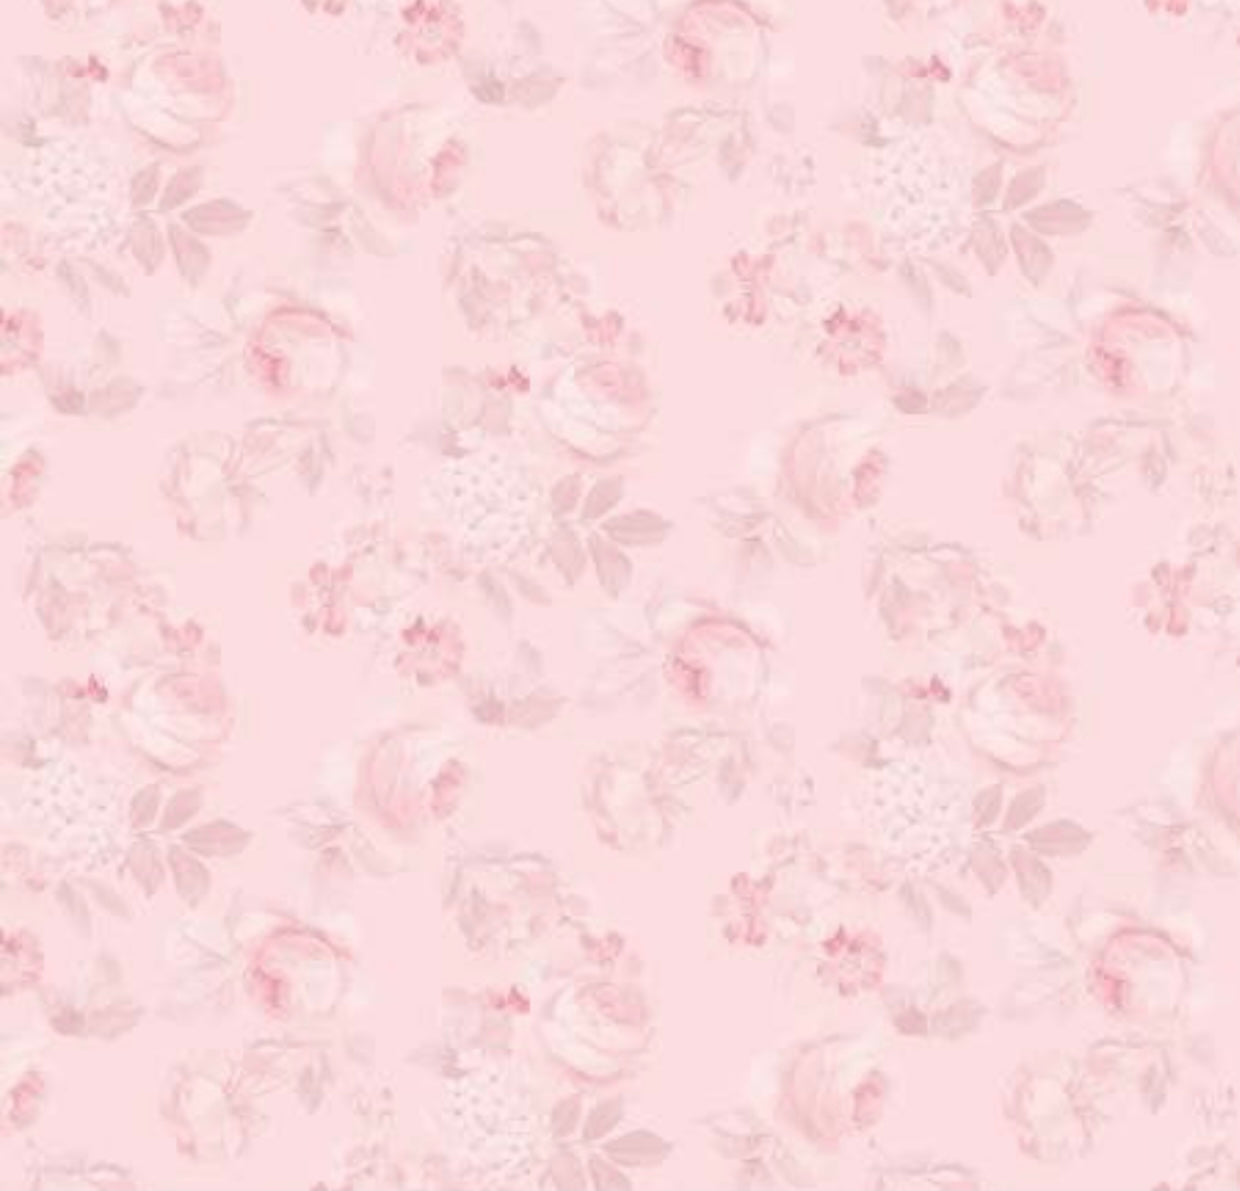 Rose & Violet`s Garden fabric. Faded Roses in Blush